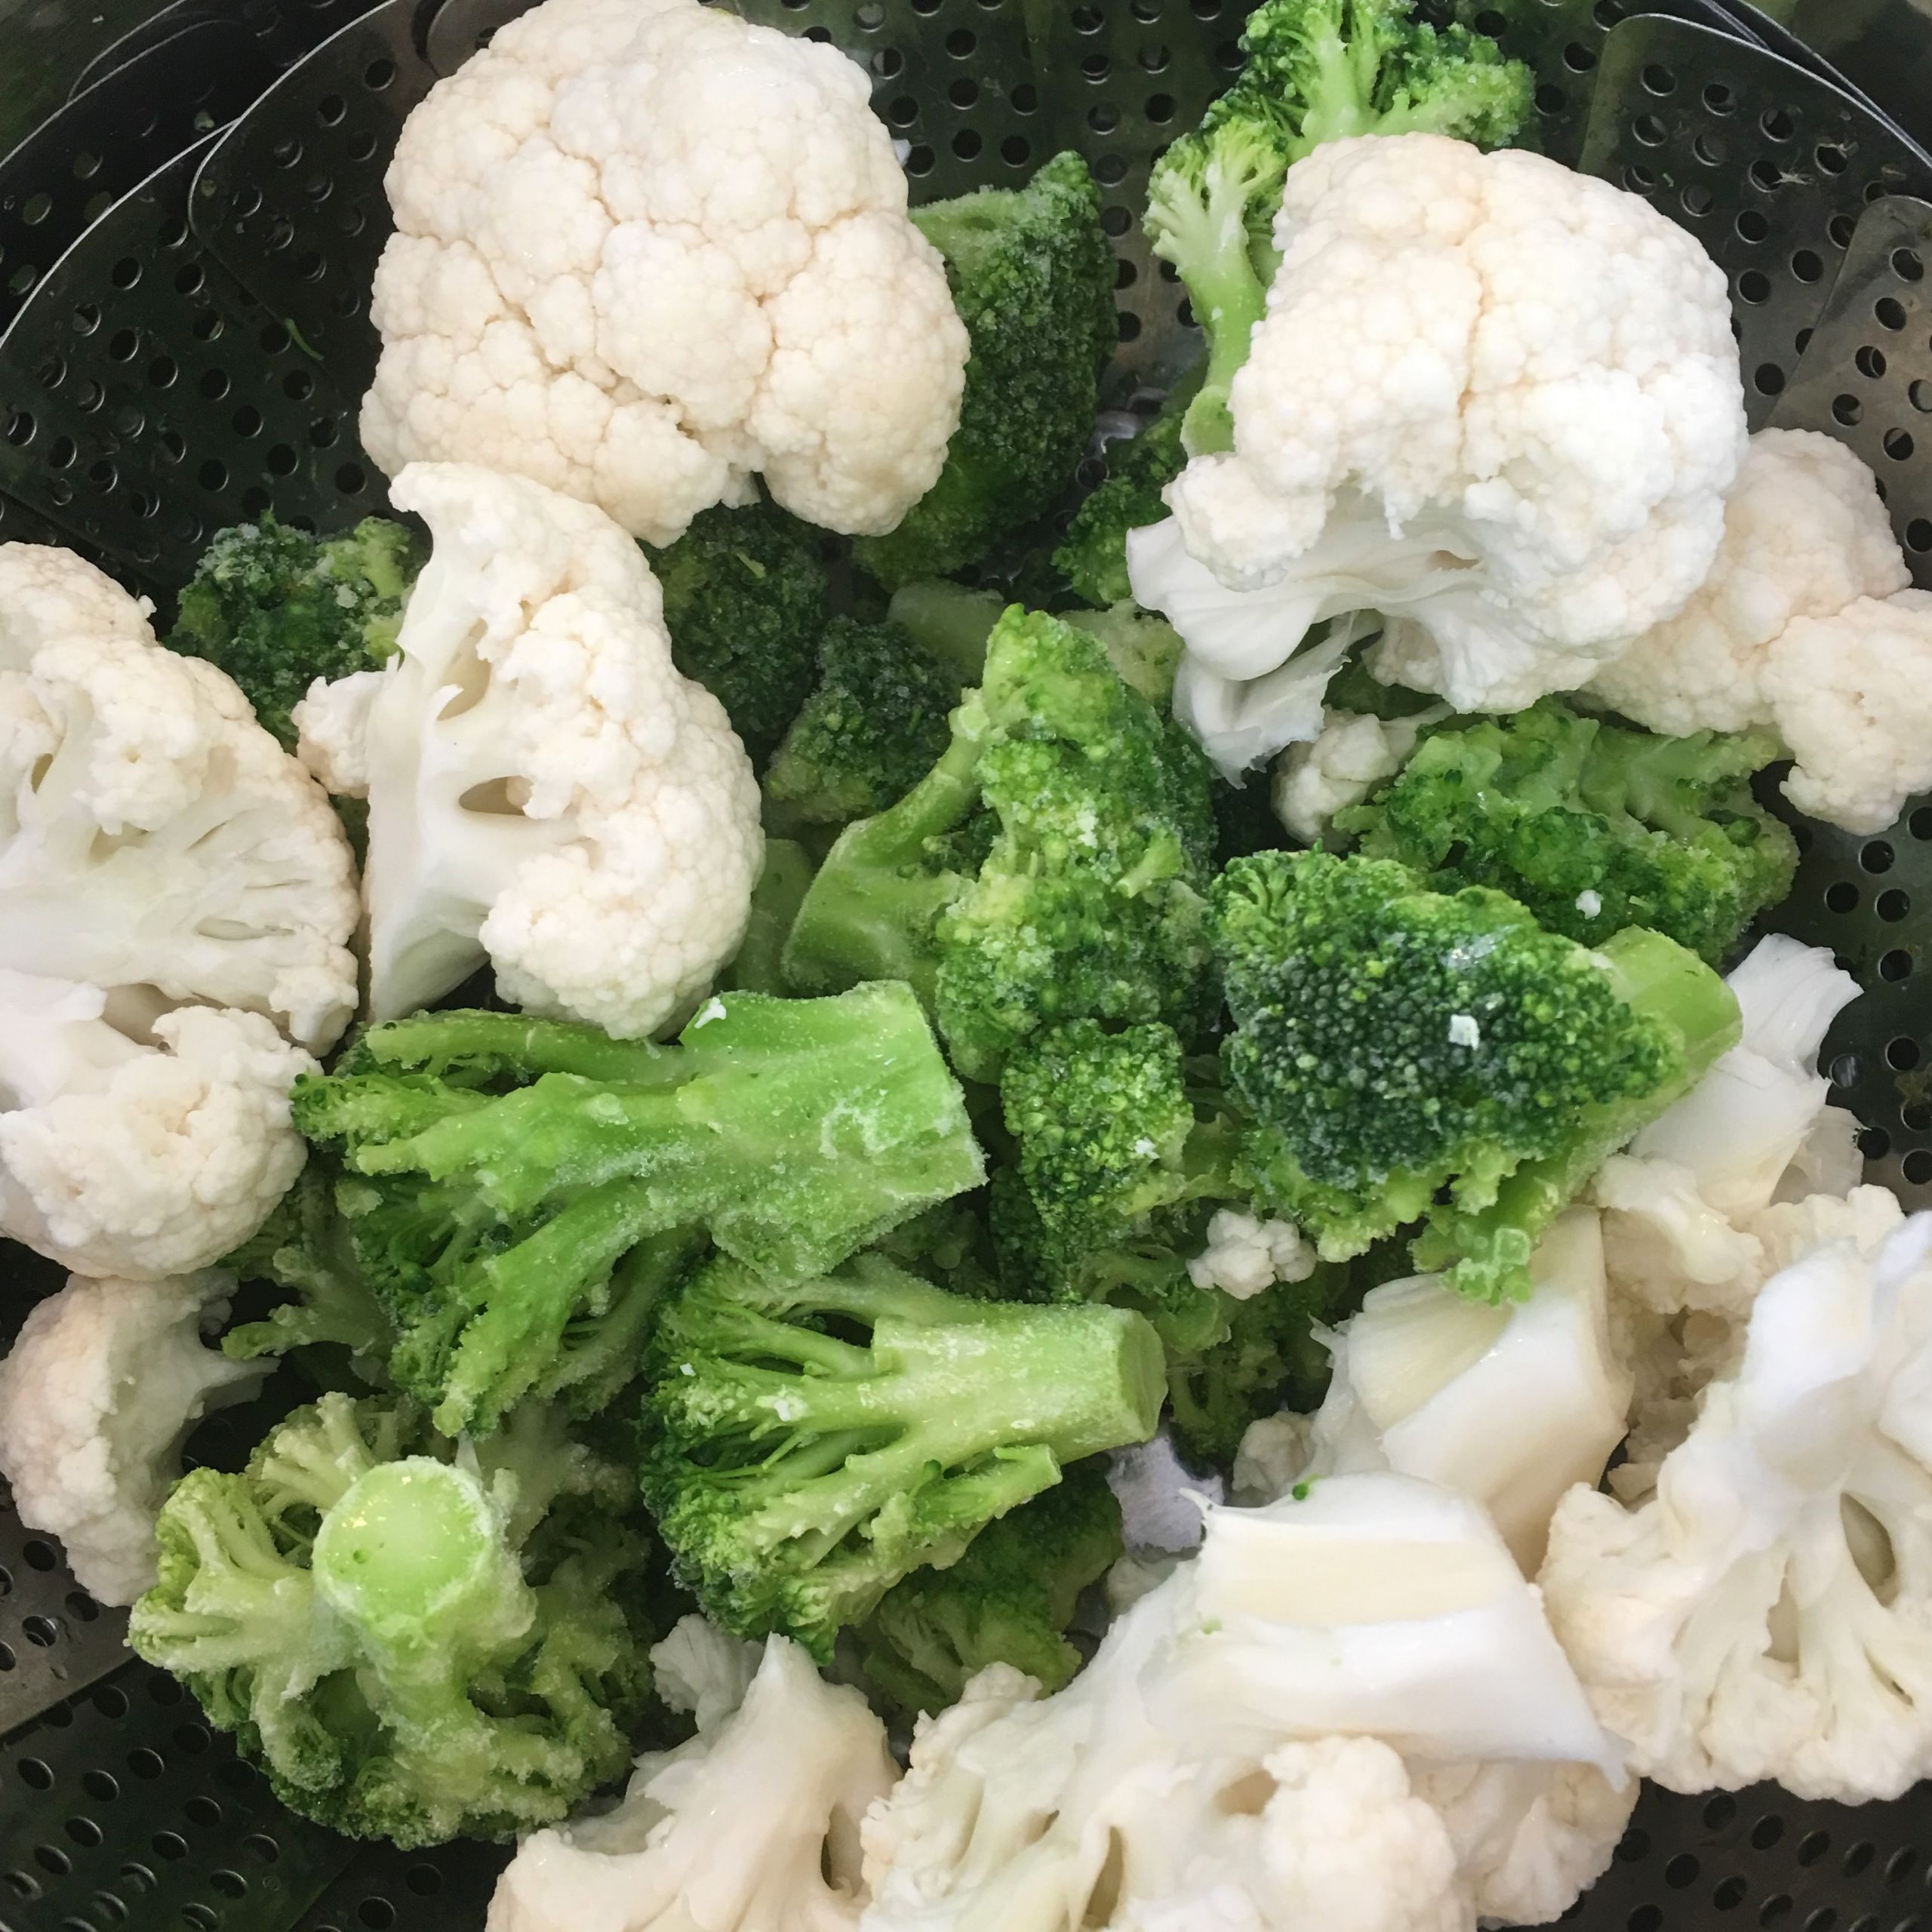 Broccoli In Instant Pot
 Broccoli How To Steam In The Instant Pot You Make it